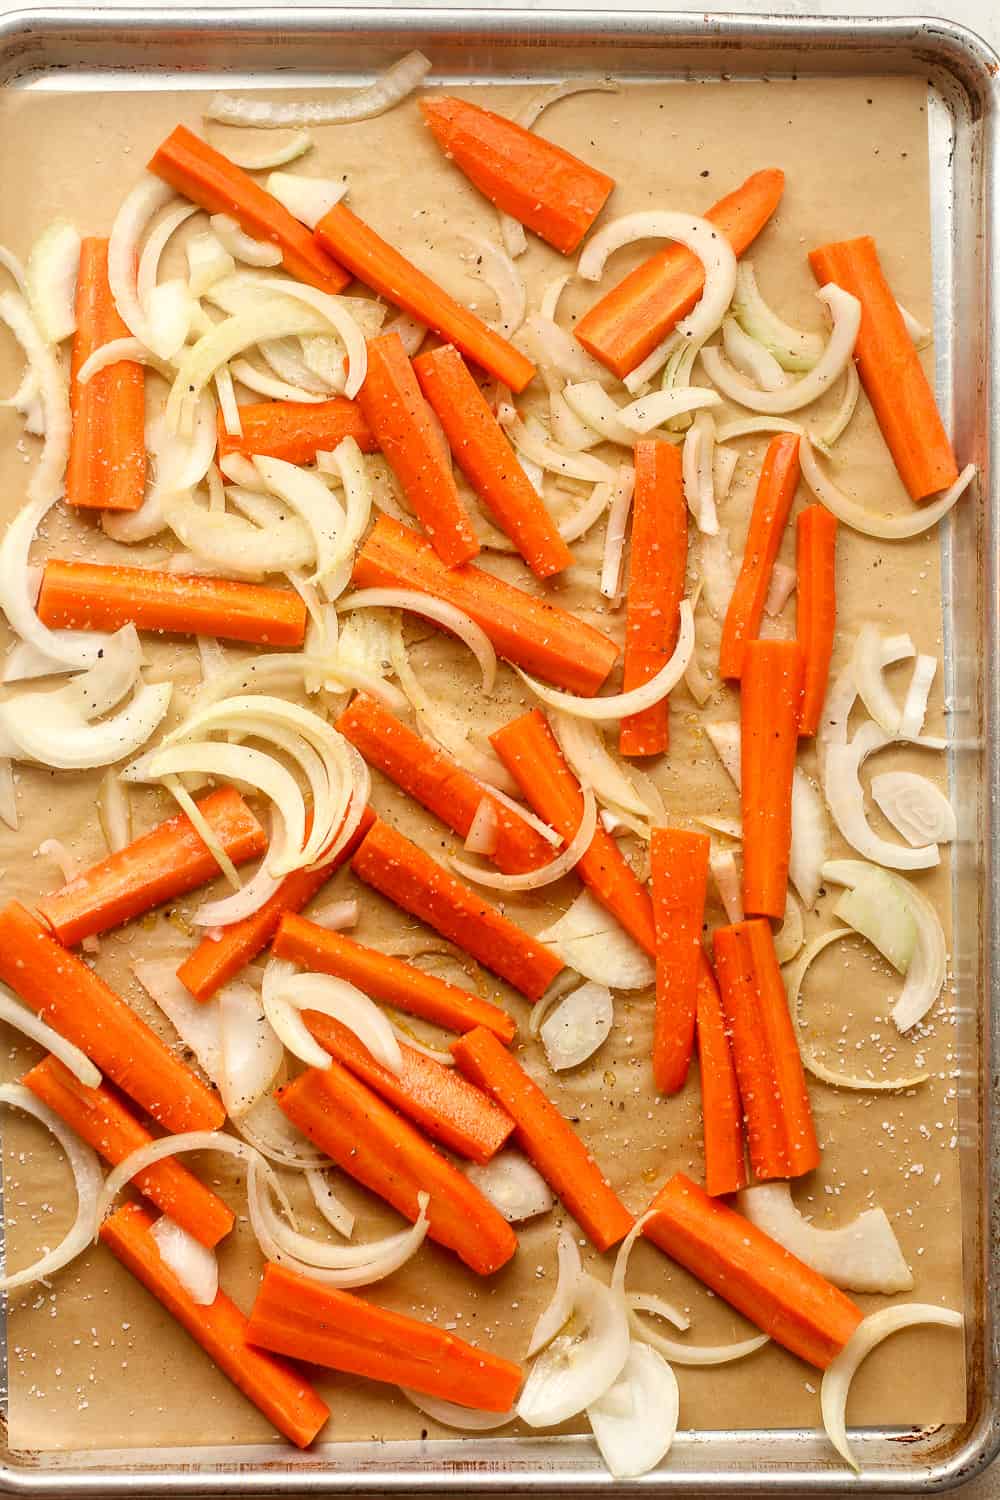 A sheet pan of the raw carrots and onions.